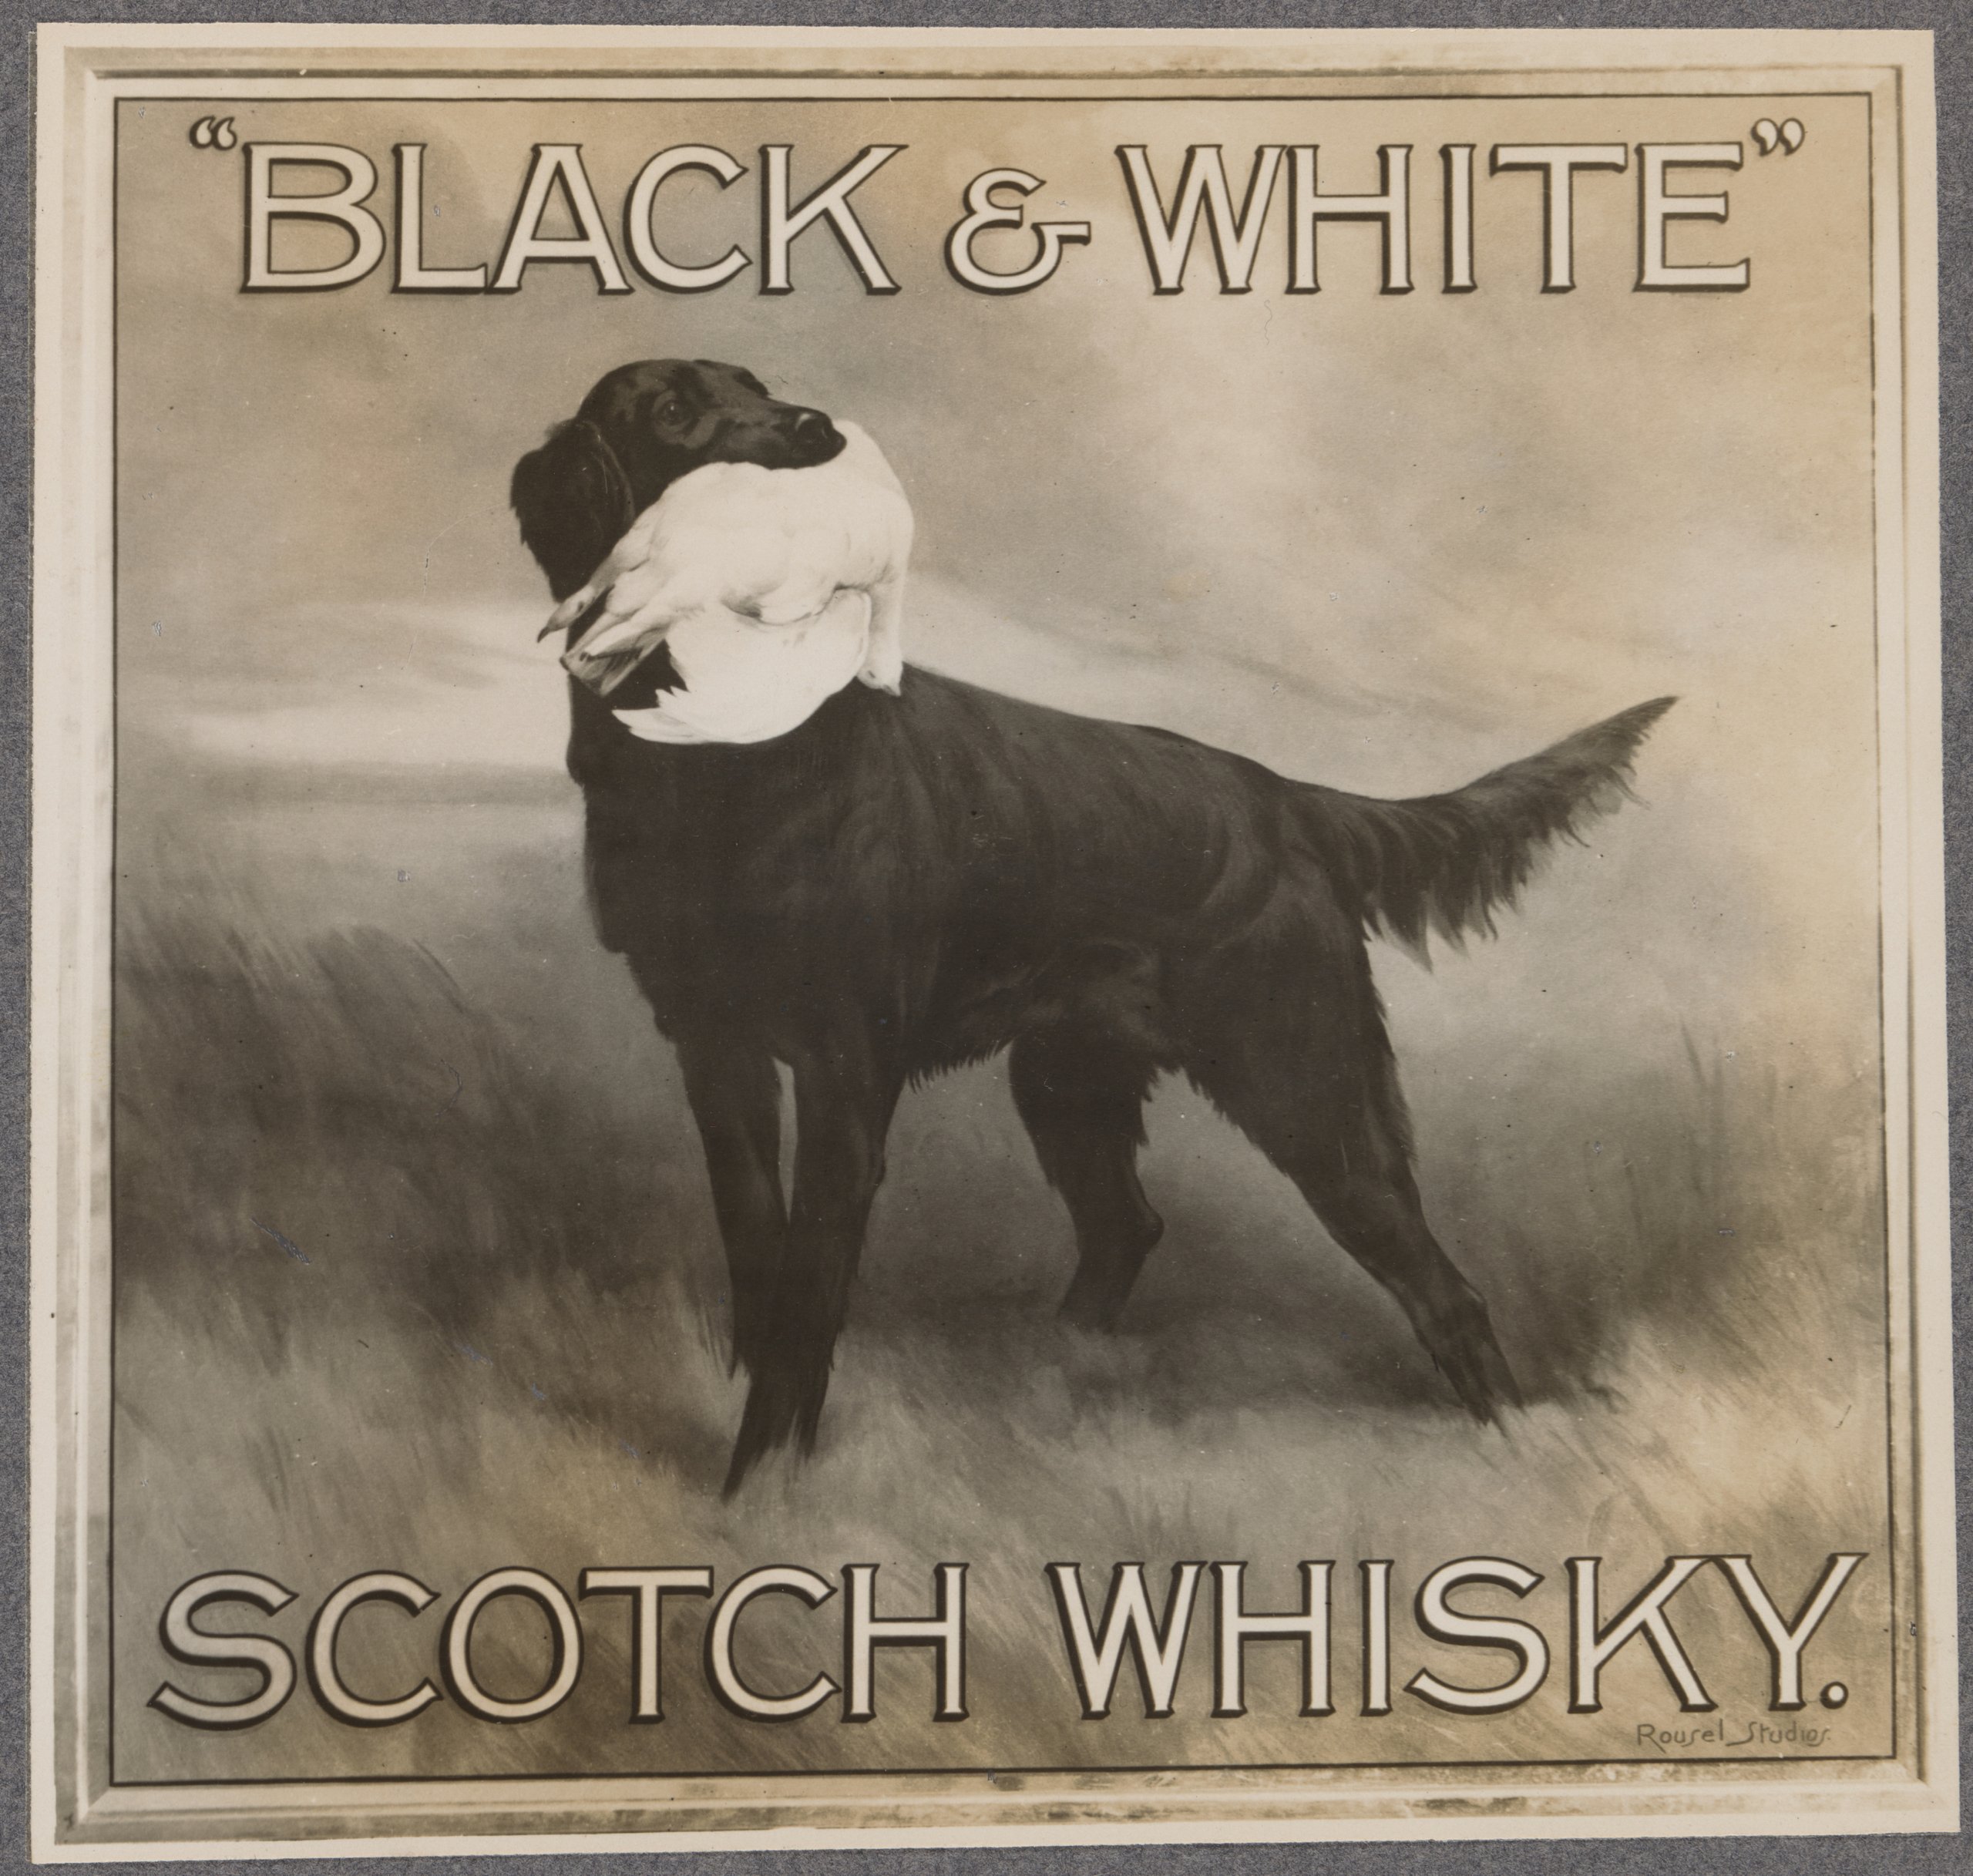 Photograph of glass pub sign for the Balfour Hotel advertising Black & White Scotch Whiskey